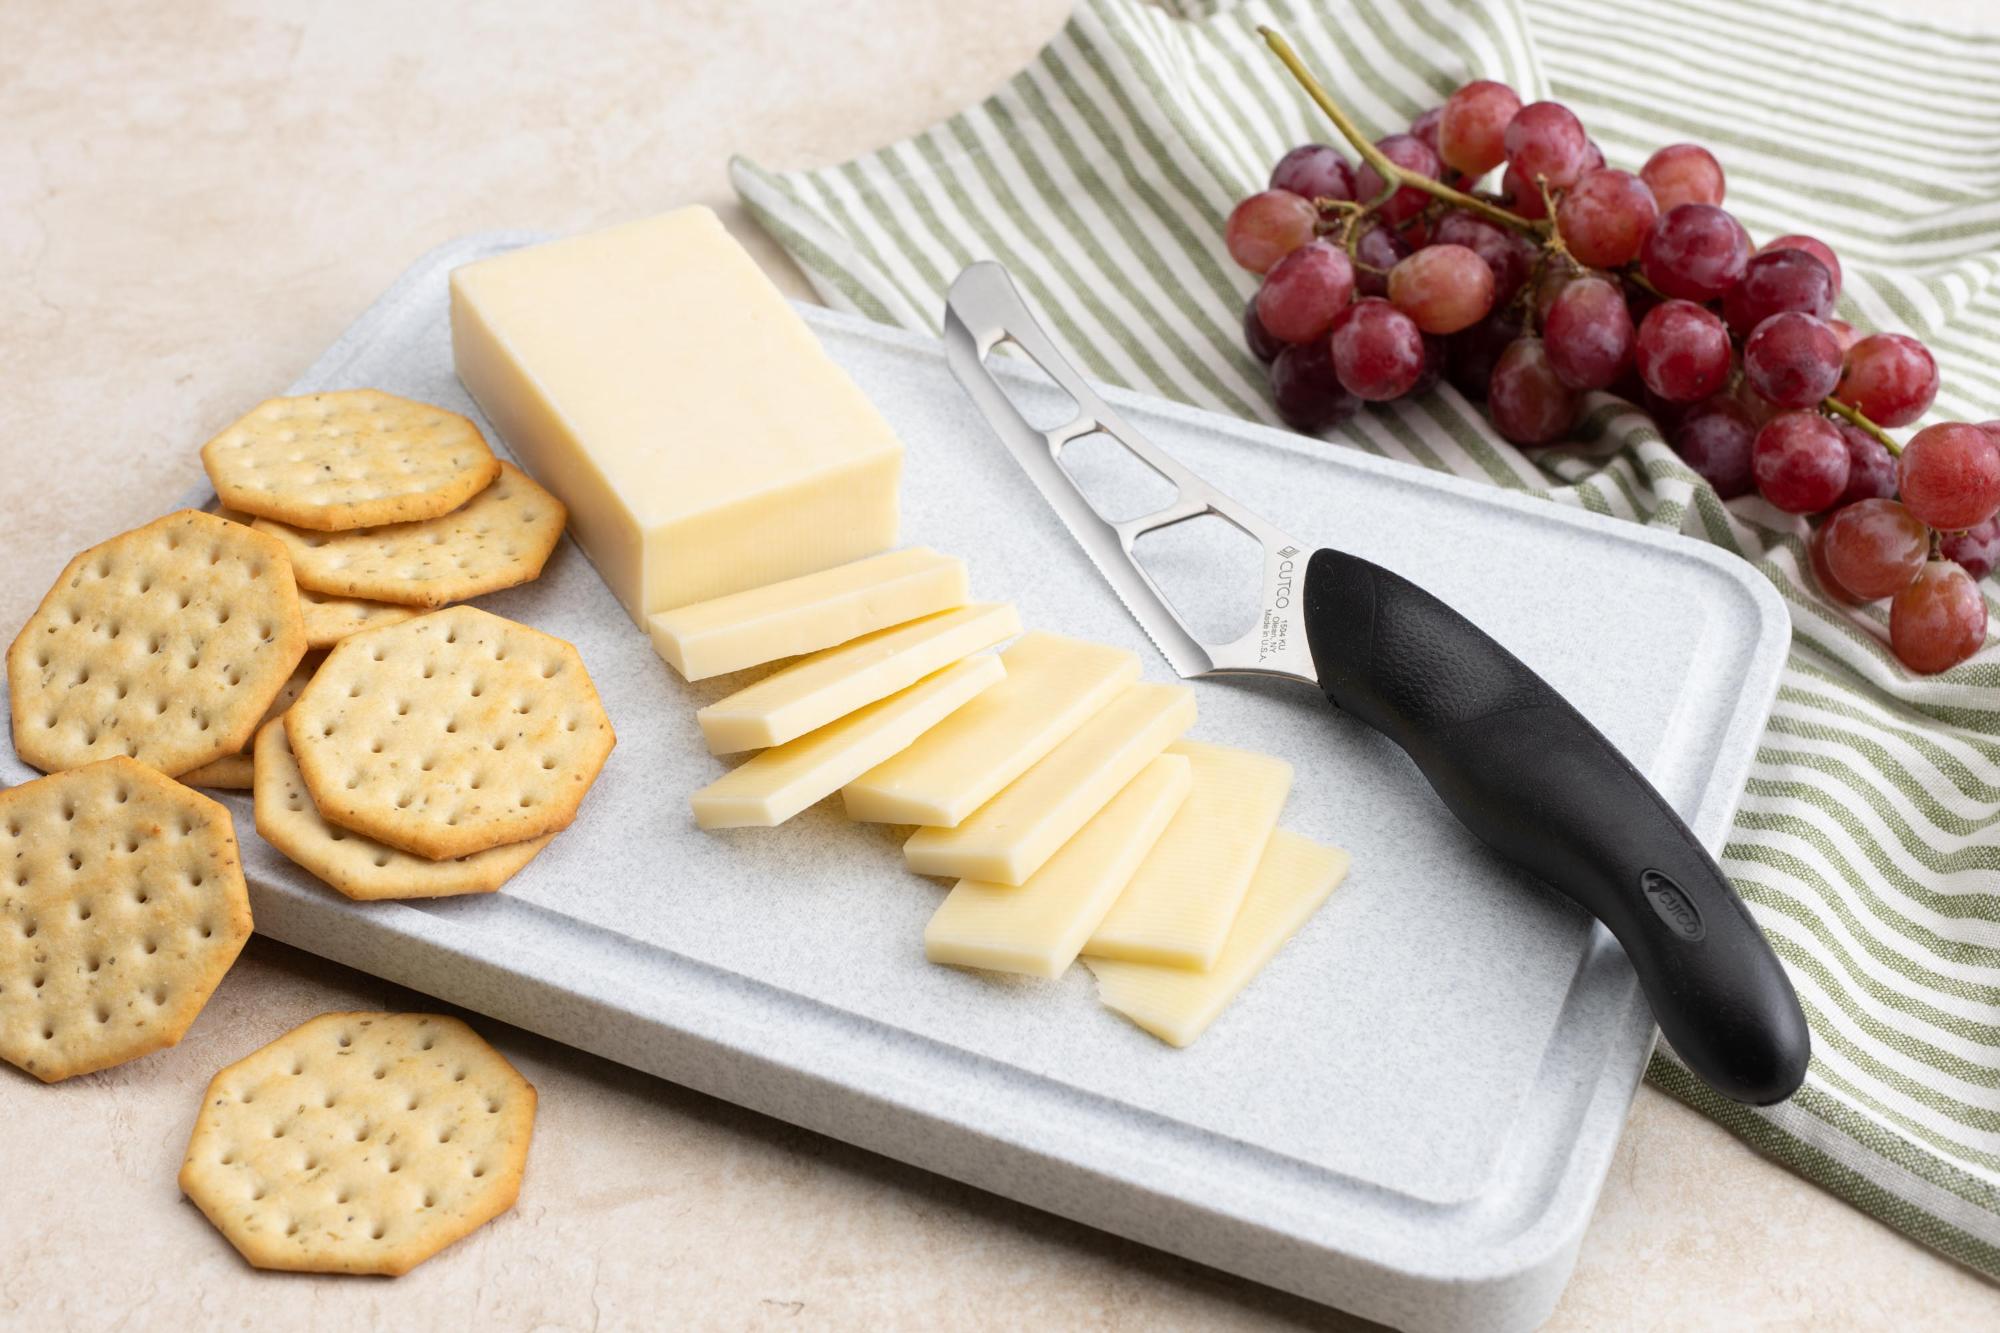 Gadget-style Cheese Knife with sliced cheese.